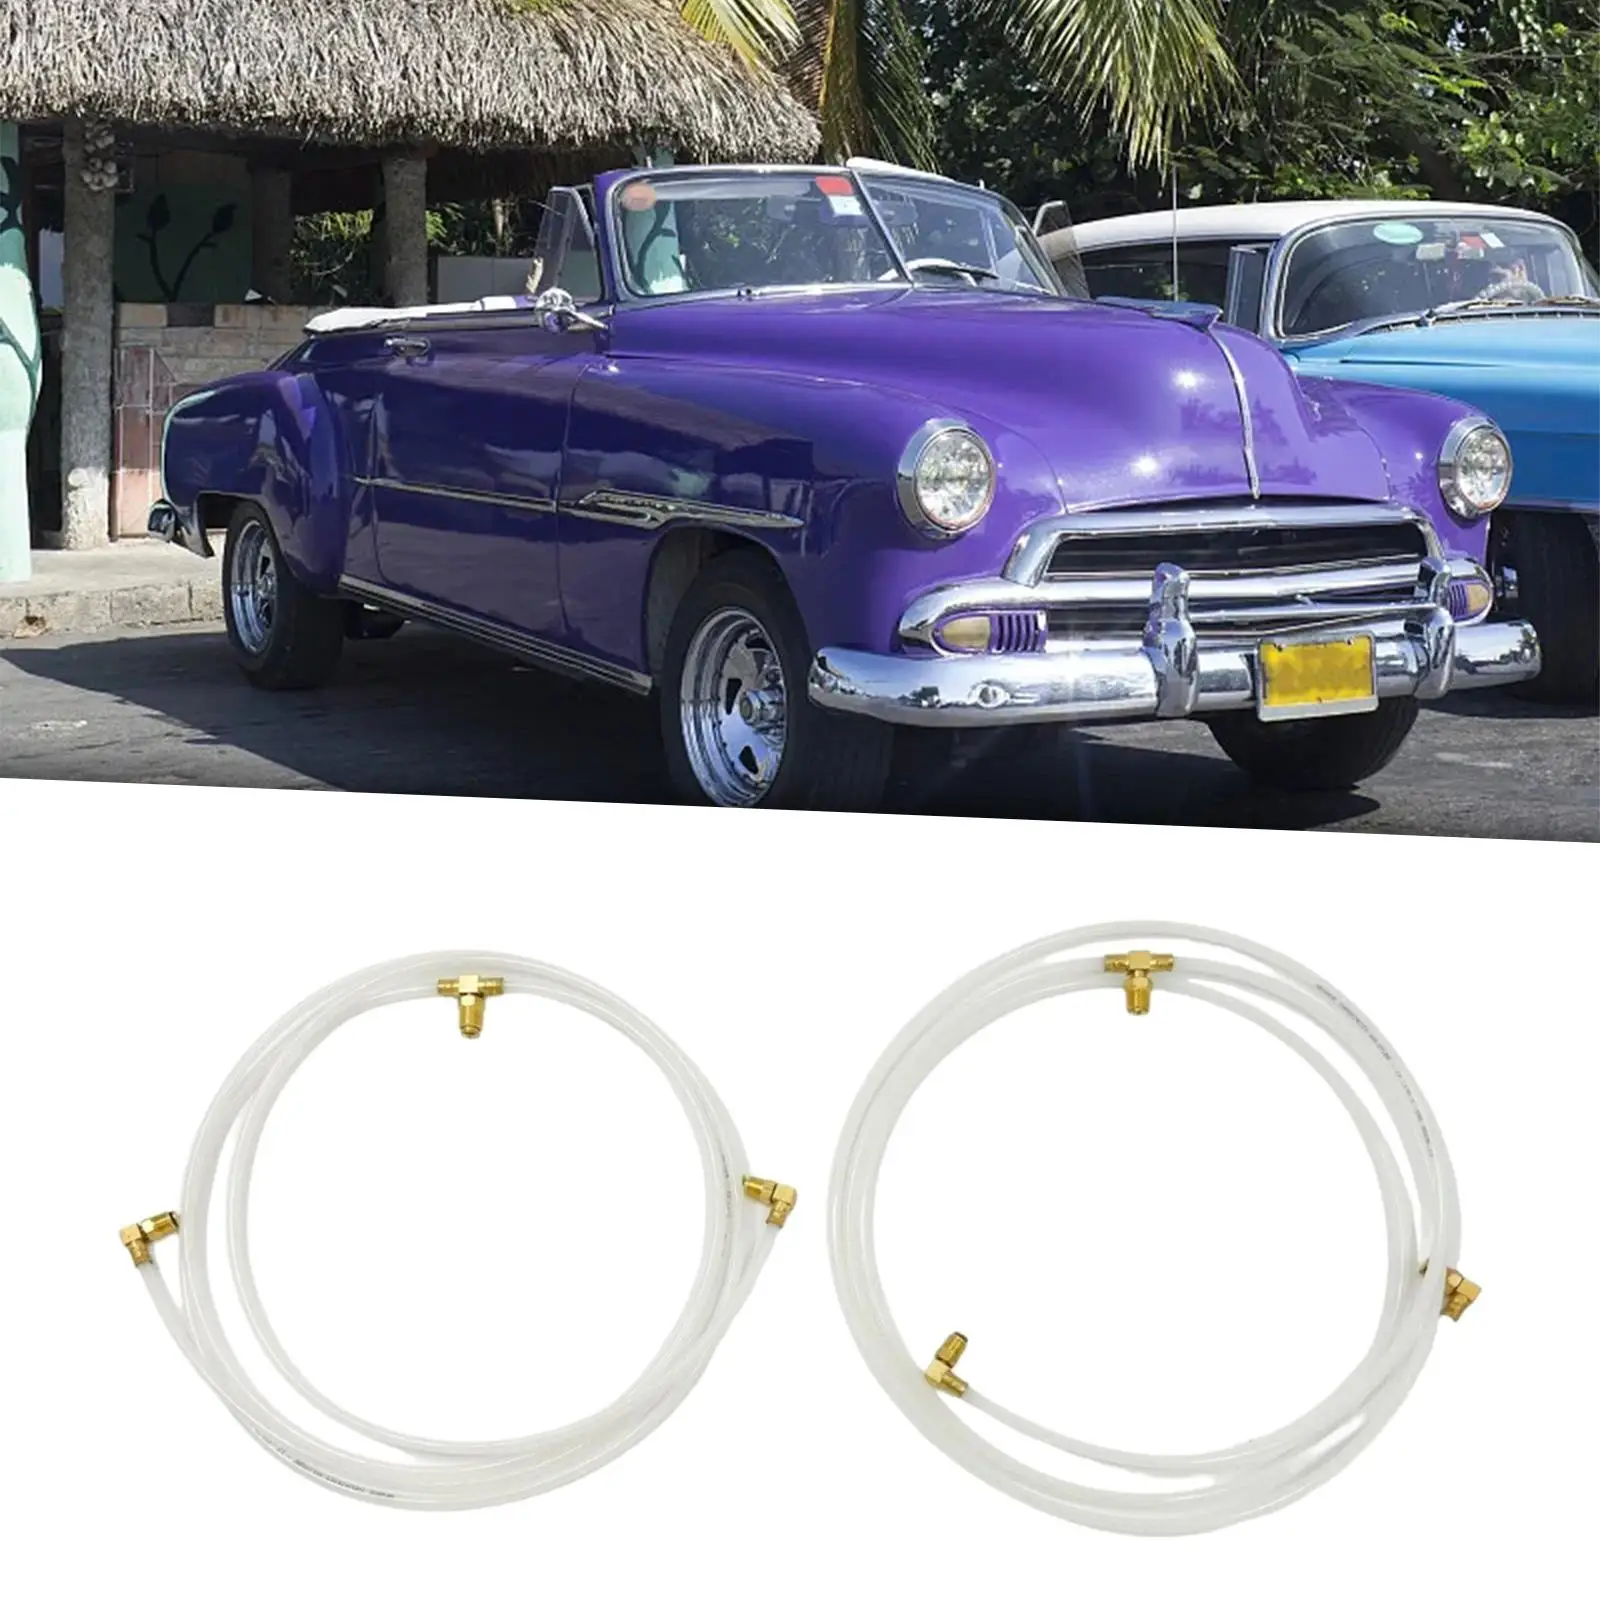 Pair Convertible Top Hydraulic Fluid Hose Lines Ho-white-set for Chevrolet Easy to Install Premium Professional Replacement